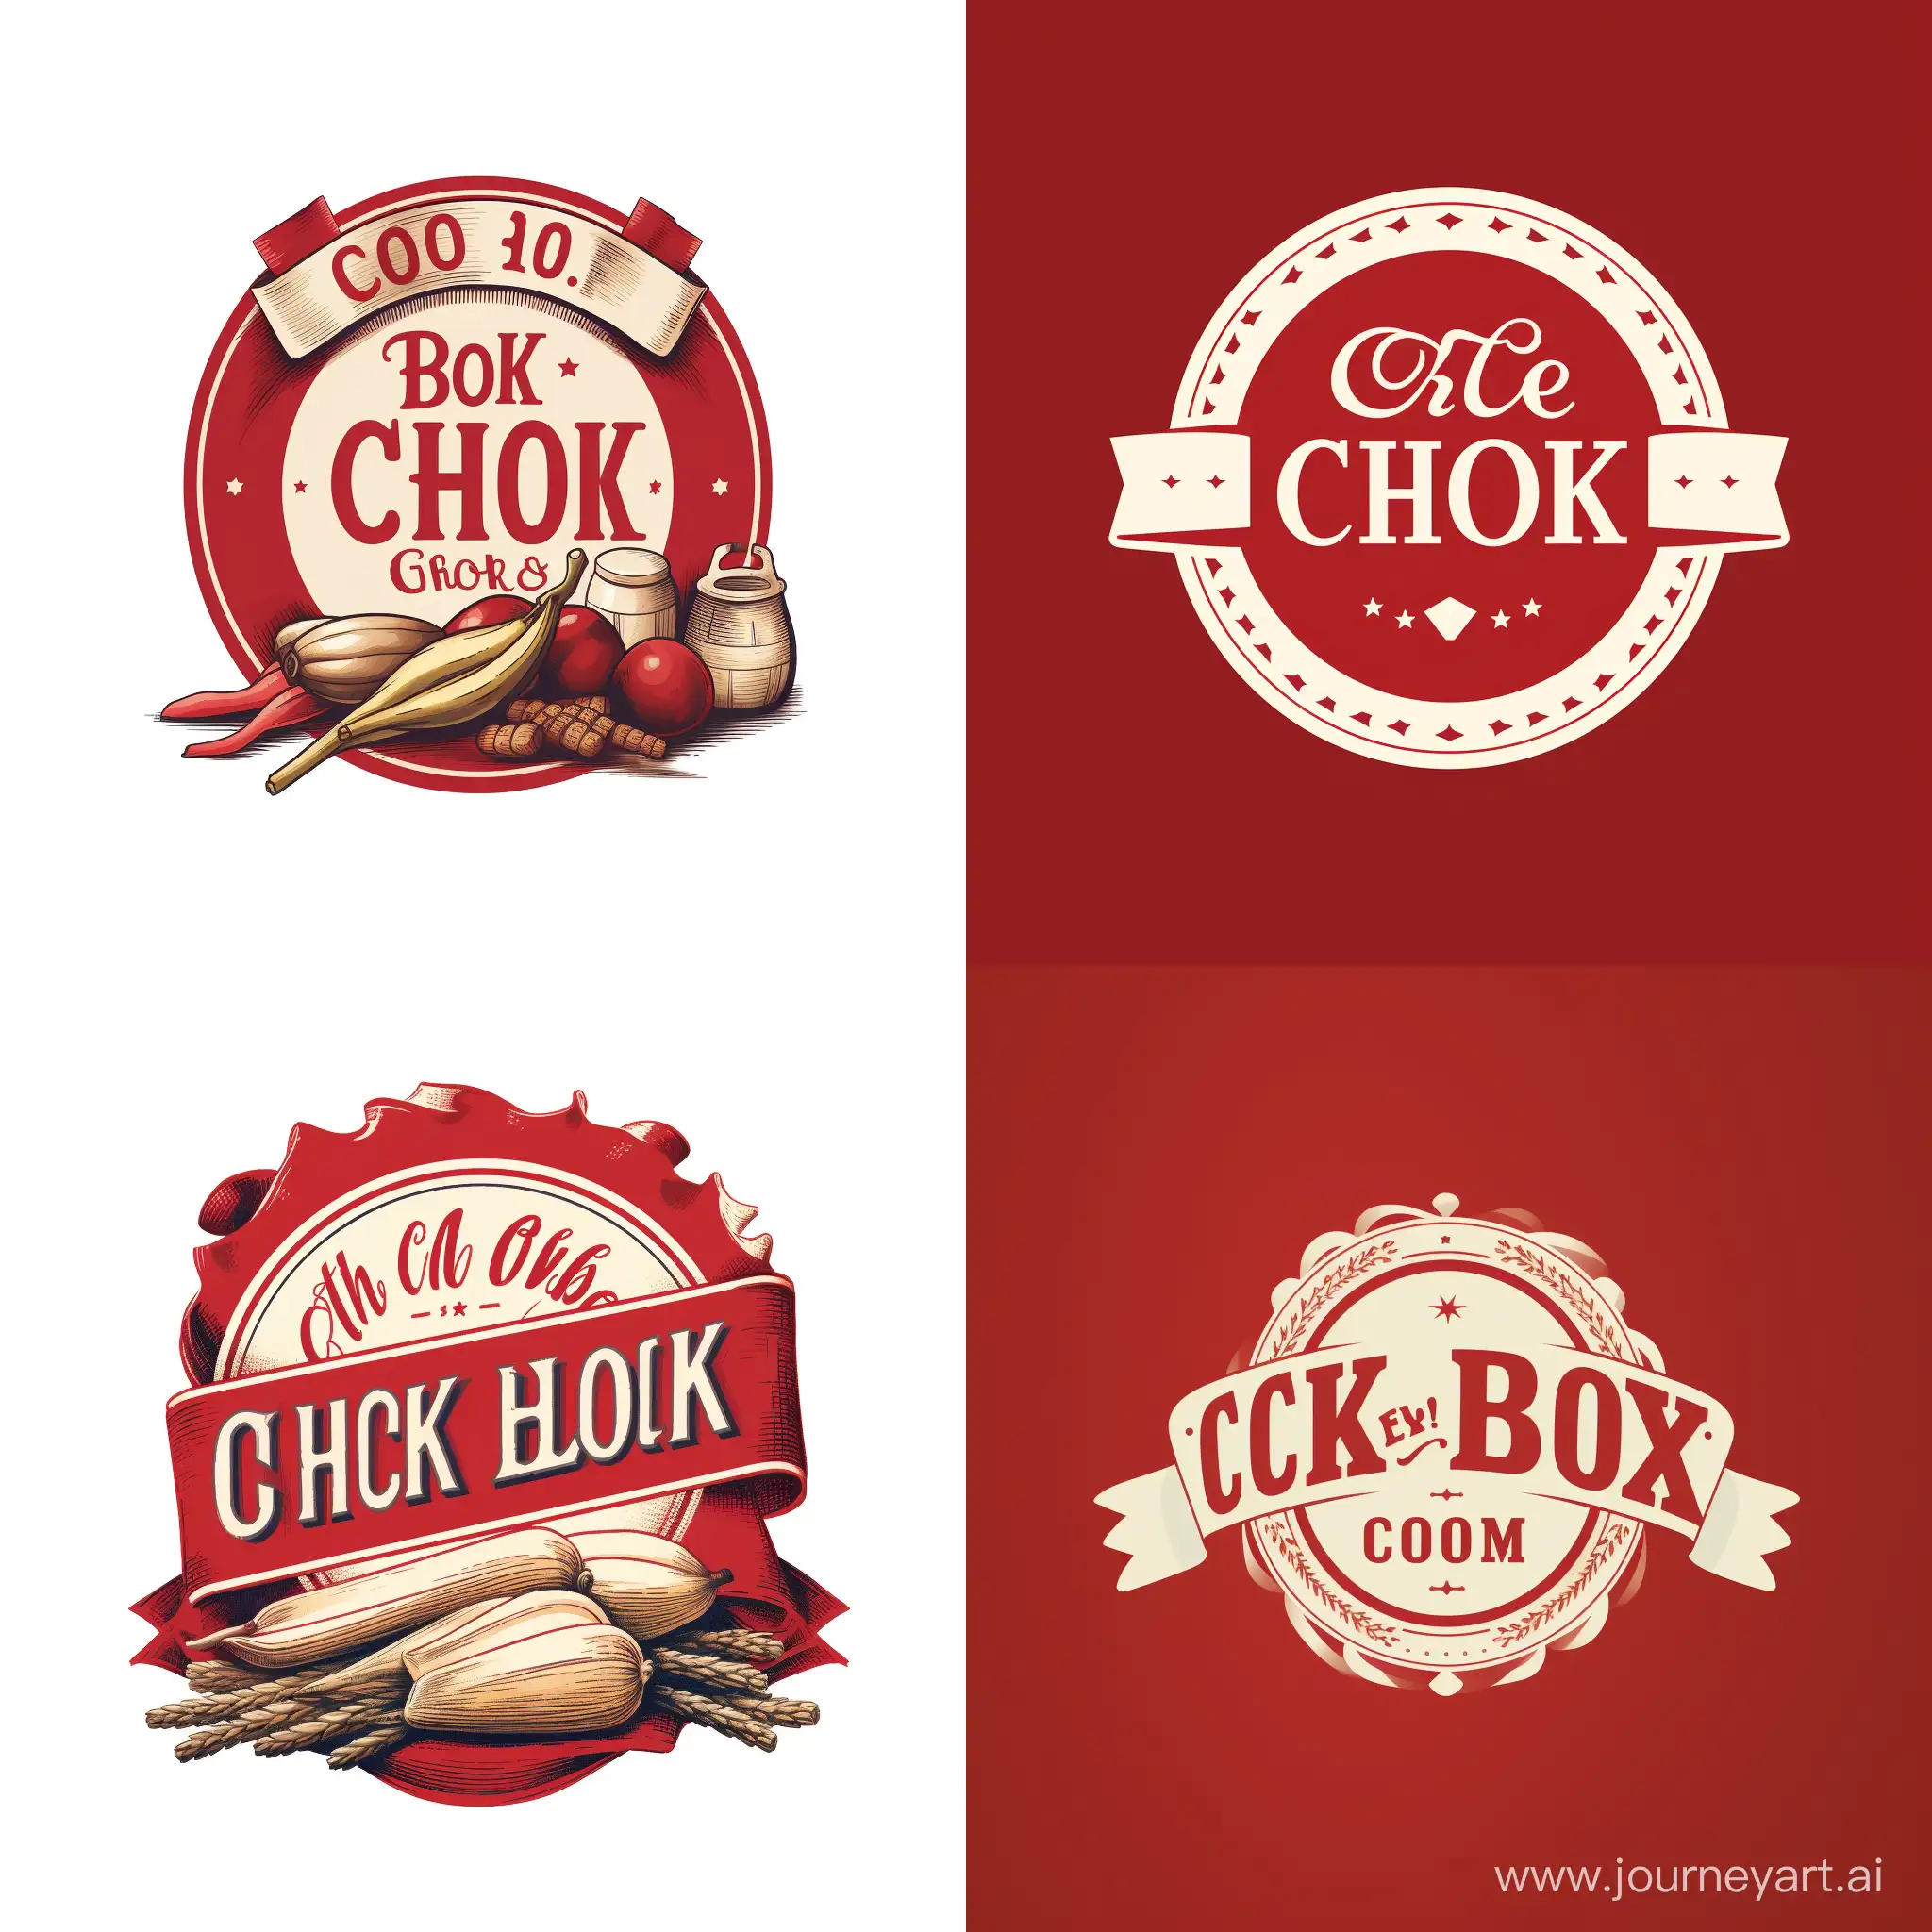 logo "LE BON CHOIX" for a general store with red and white colors 

Le bon choix = The great choice, so use like as a logo